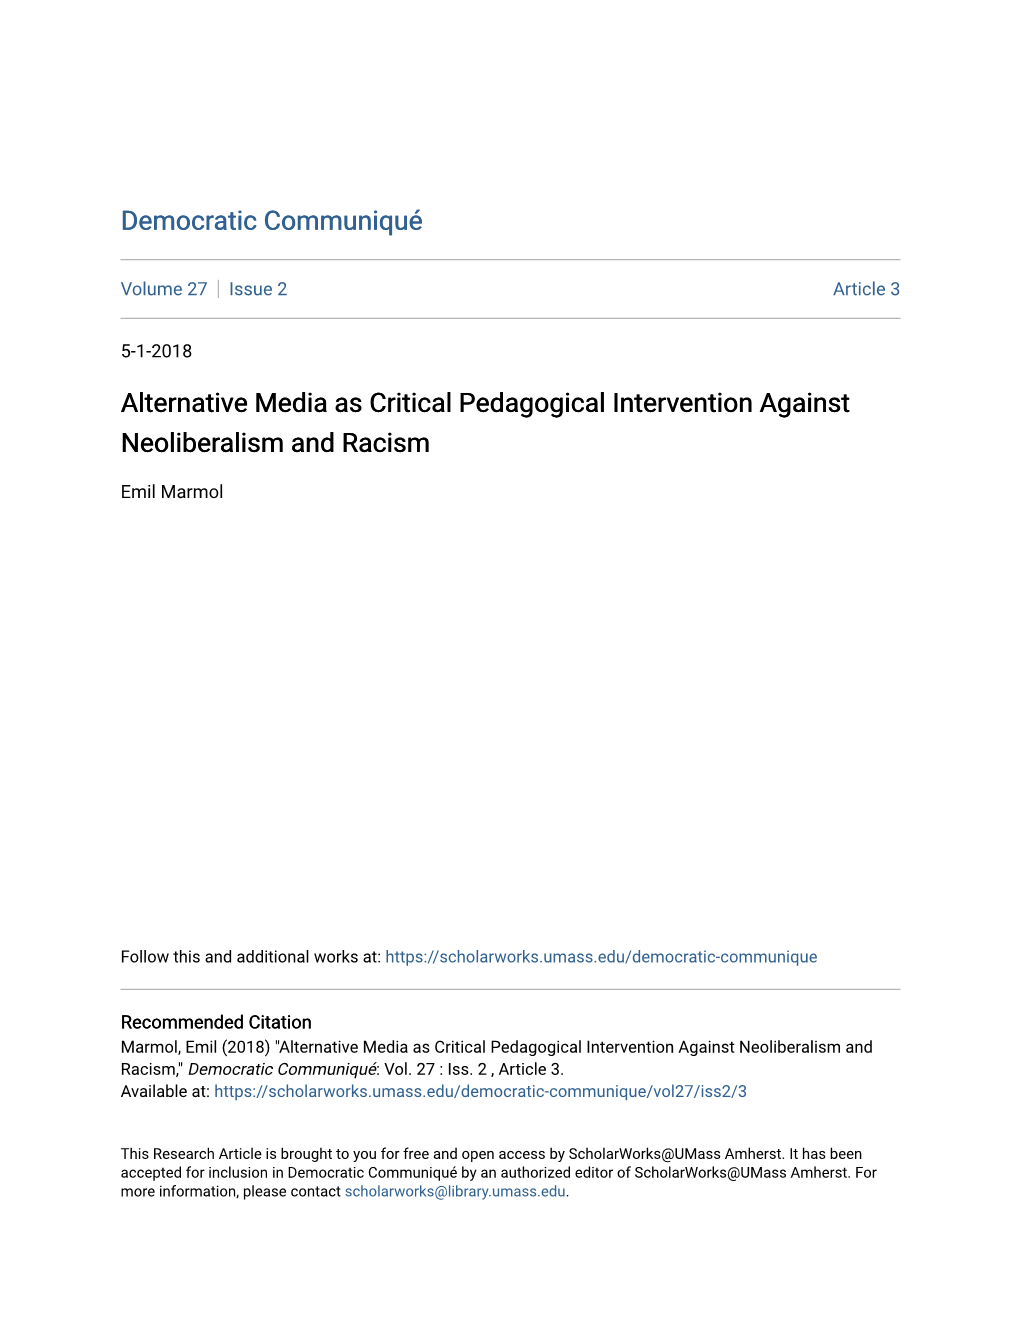 Alternative Media As Critical Pedagogical Intervention Against Neoliberalism and Racism